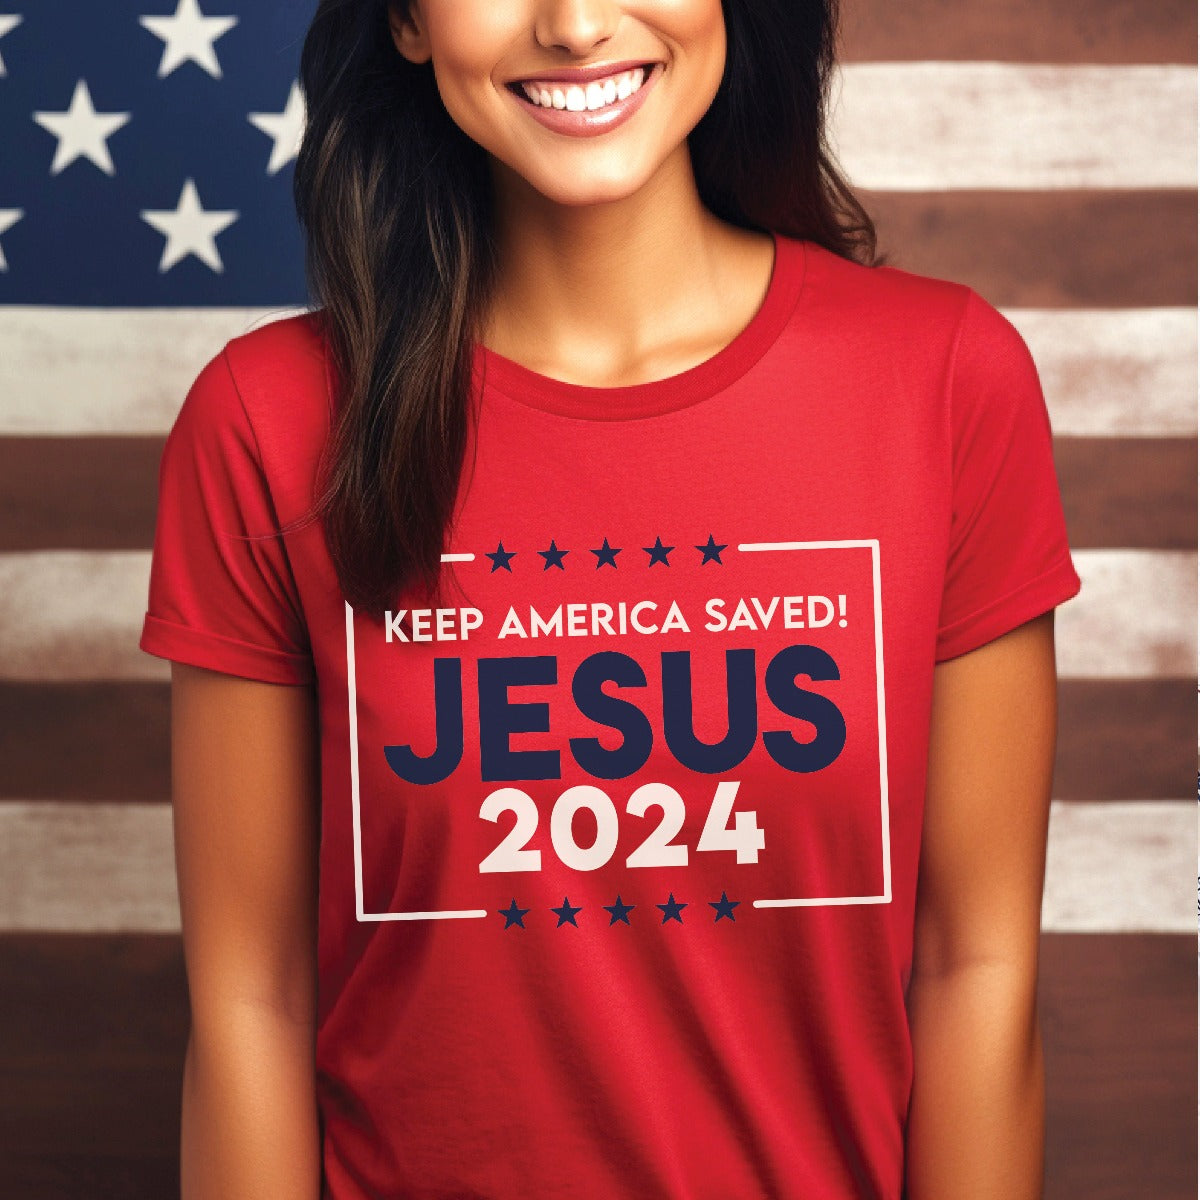 Patriotic young woman wearing white President election vote unisex Christian t-shirt with "Jesus 2024 - Keep America Saved" and stars printed in bold red, white, and blue fonts, made in the USA, made for men and women God & Country Patriots